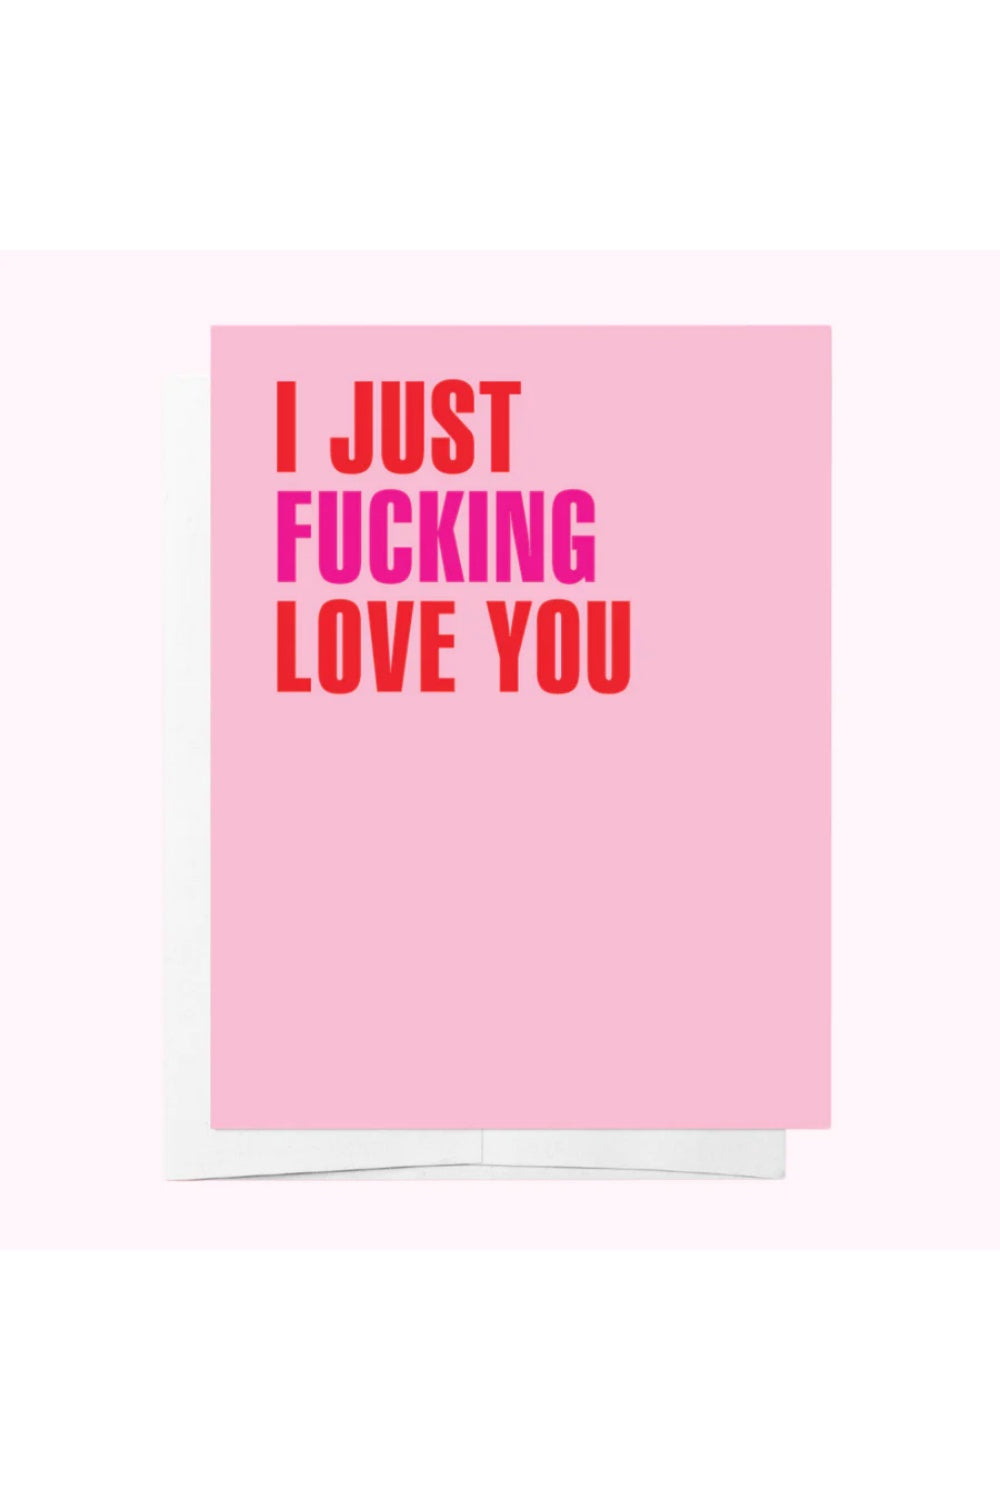 I JUST FUCKING LOVE YOU GREETING CARD